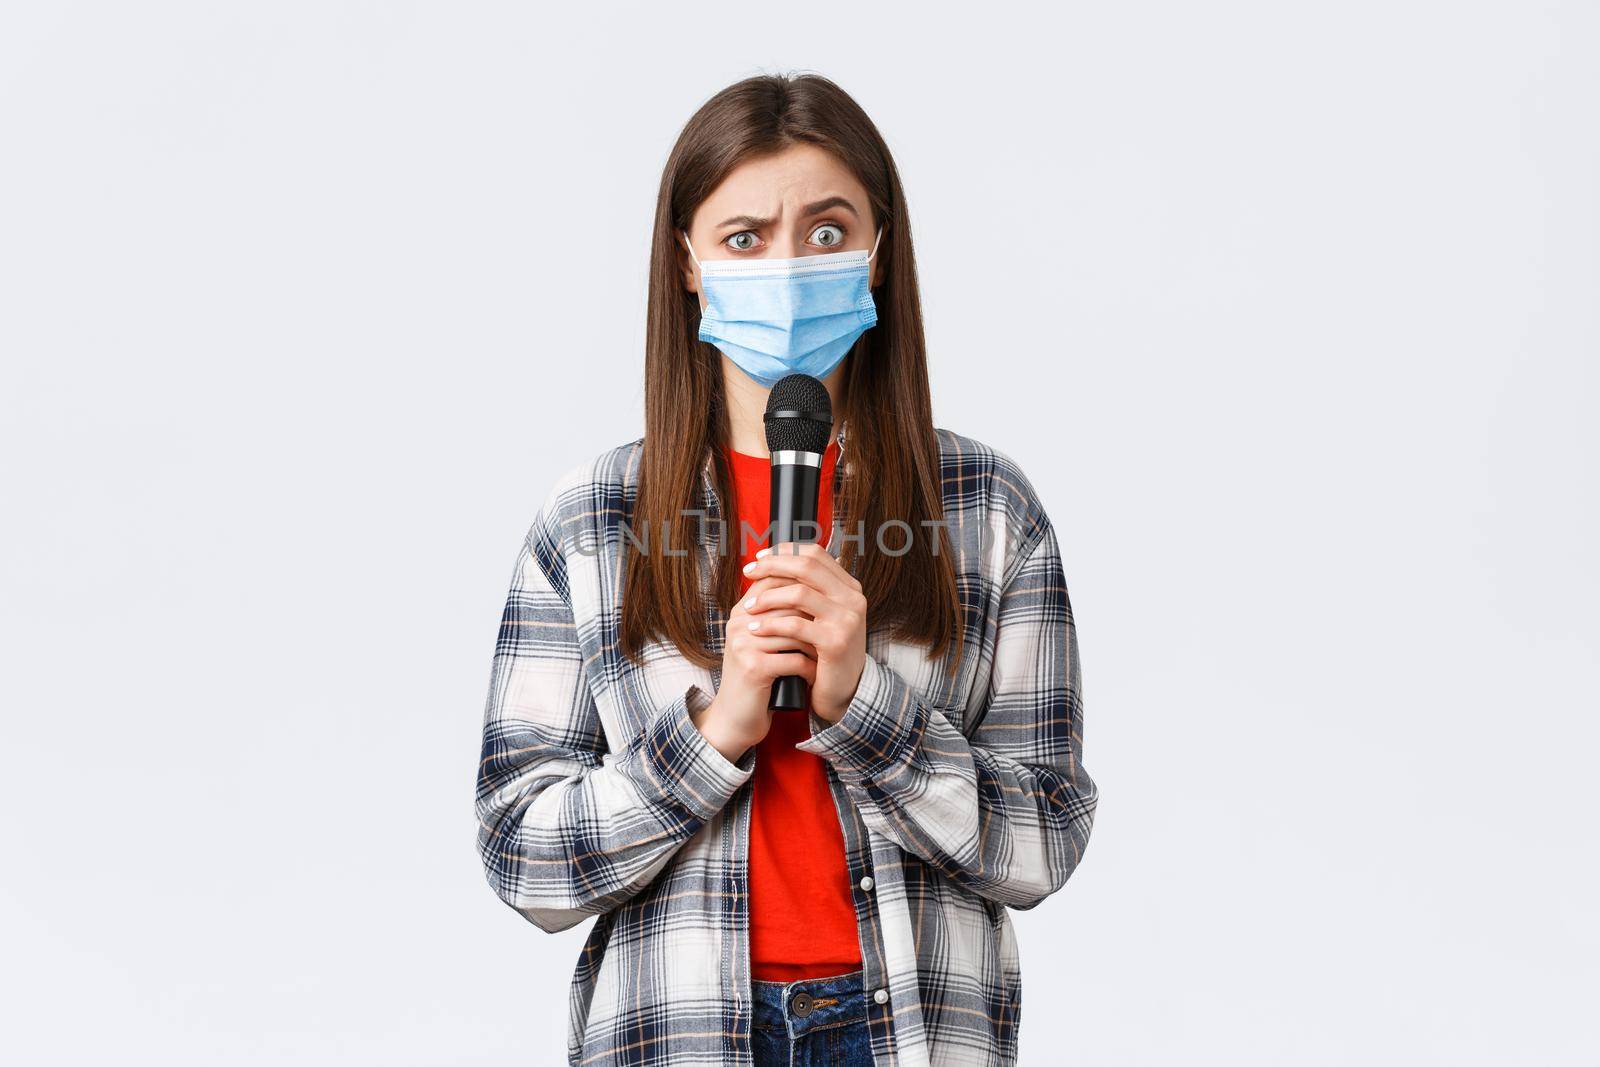 Coronavirus outbreak, leisure on quarantine, social distancing and emotions concept. Confused woman in medical mask look smth strange, holding microphone, perform, white background.